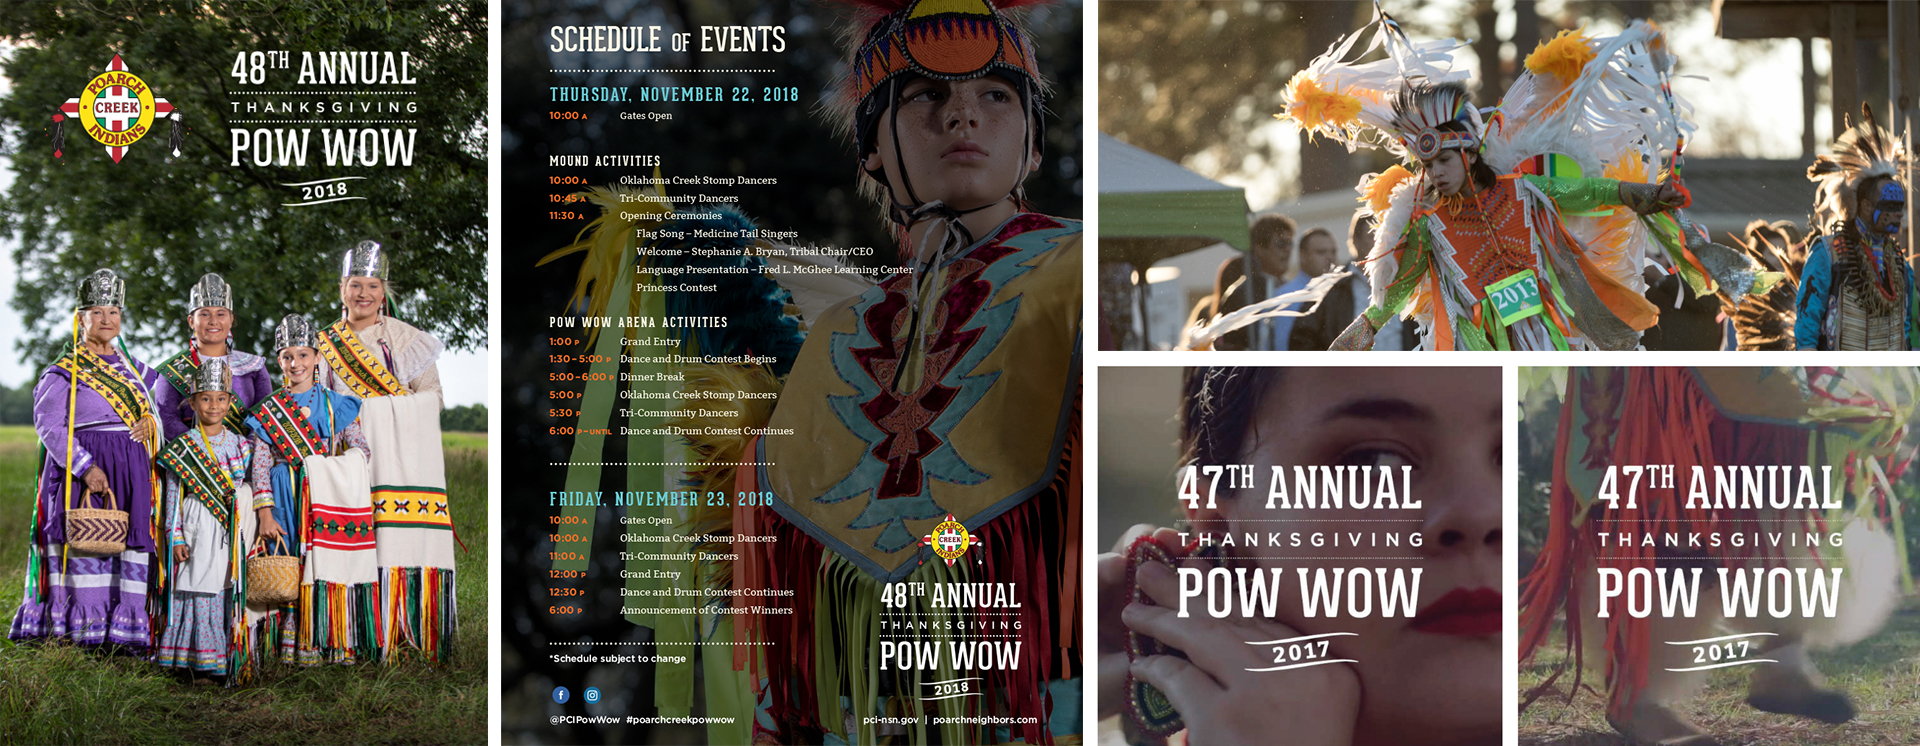 Pow Wow Branding and Identity Examples